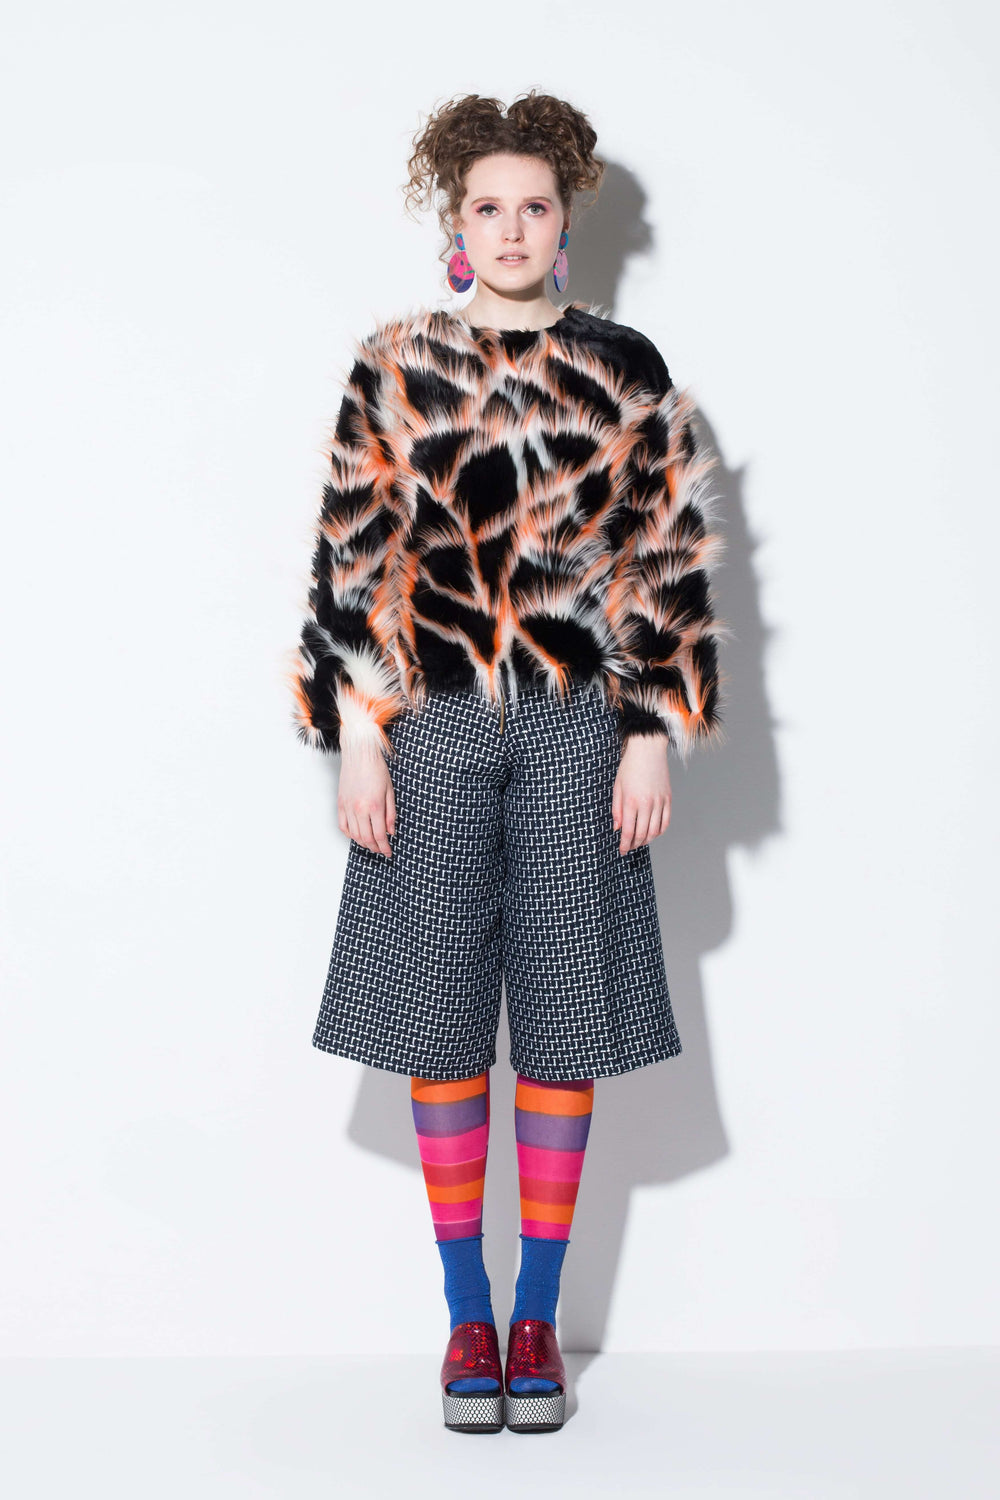 free spirit| a fun faux fur top in flash orange and black colour block from jin & yin front view